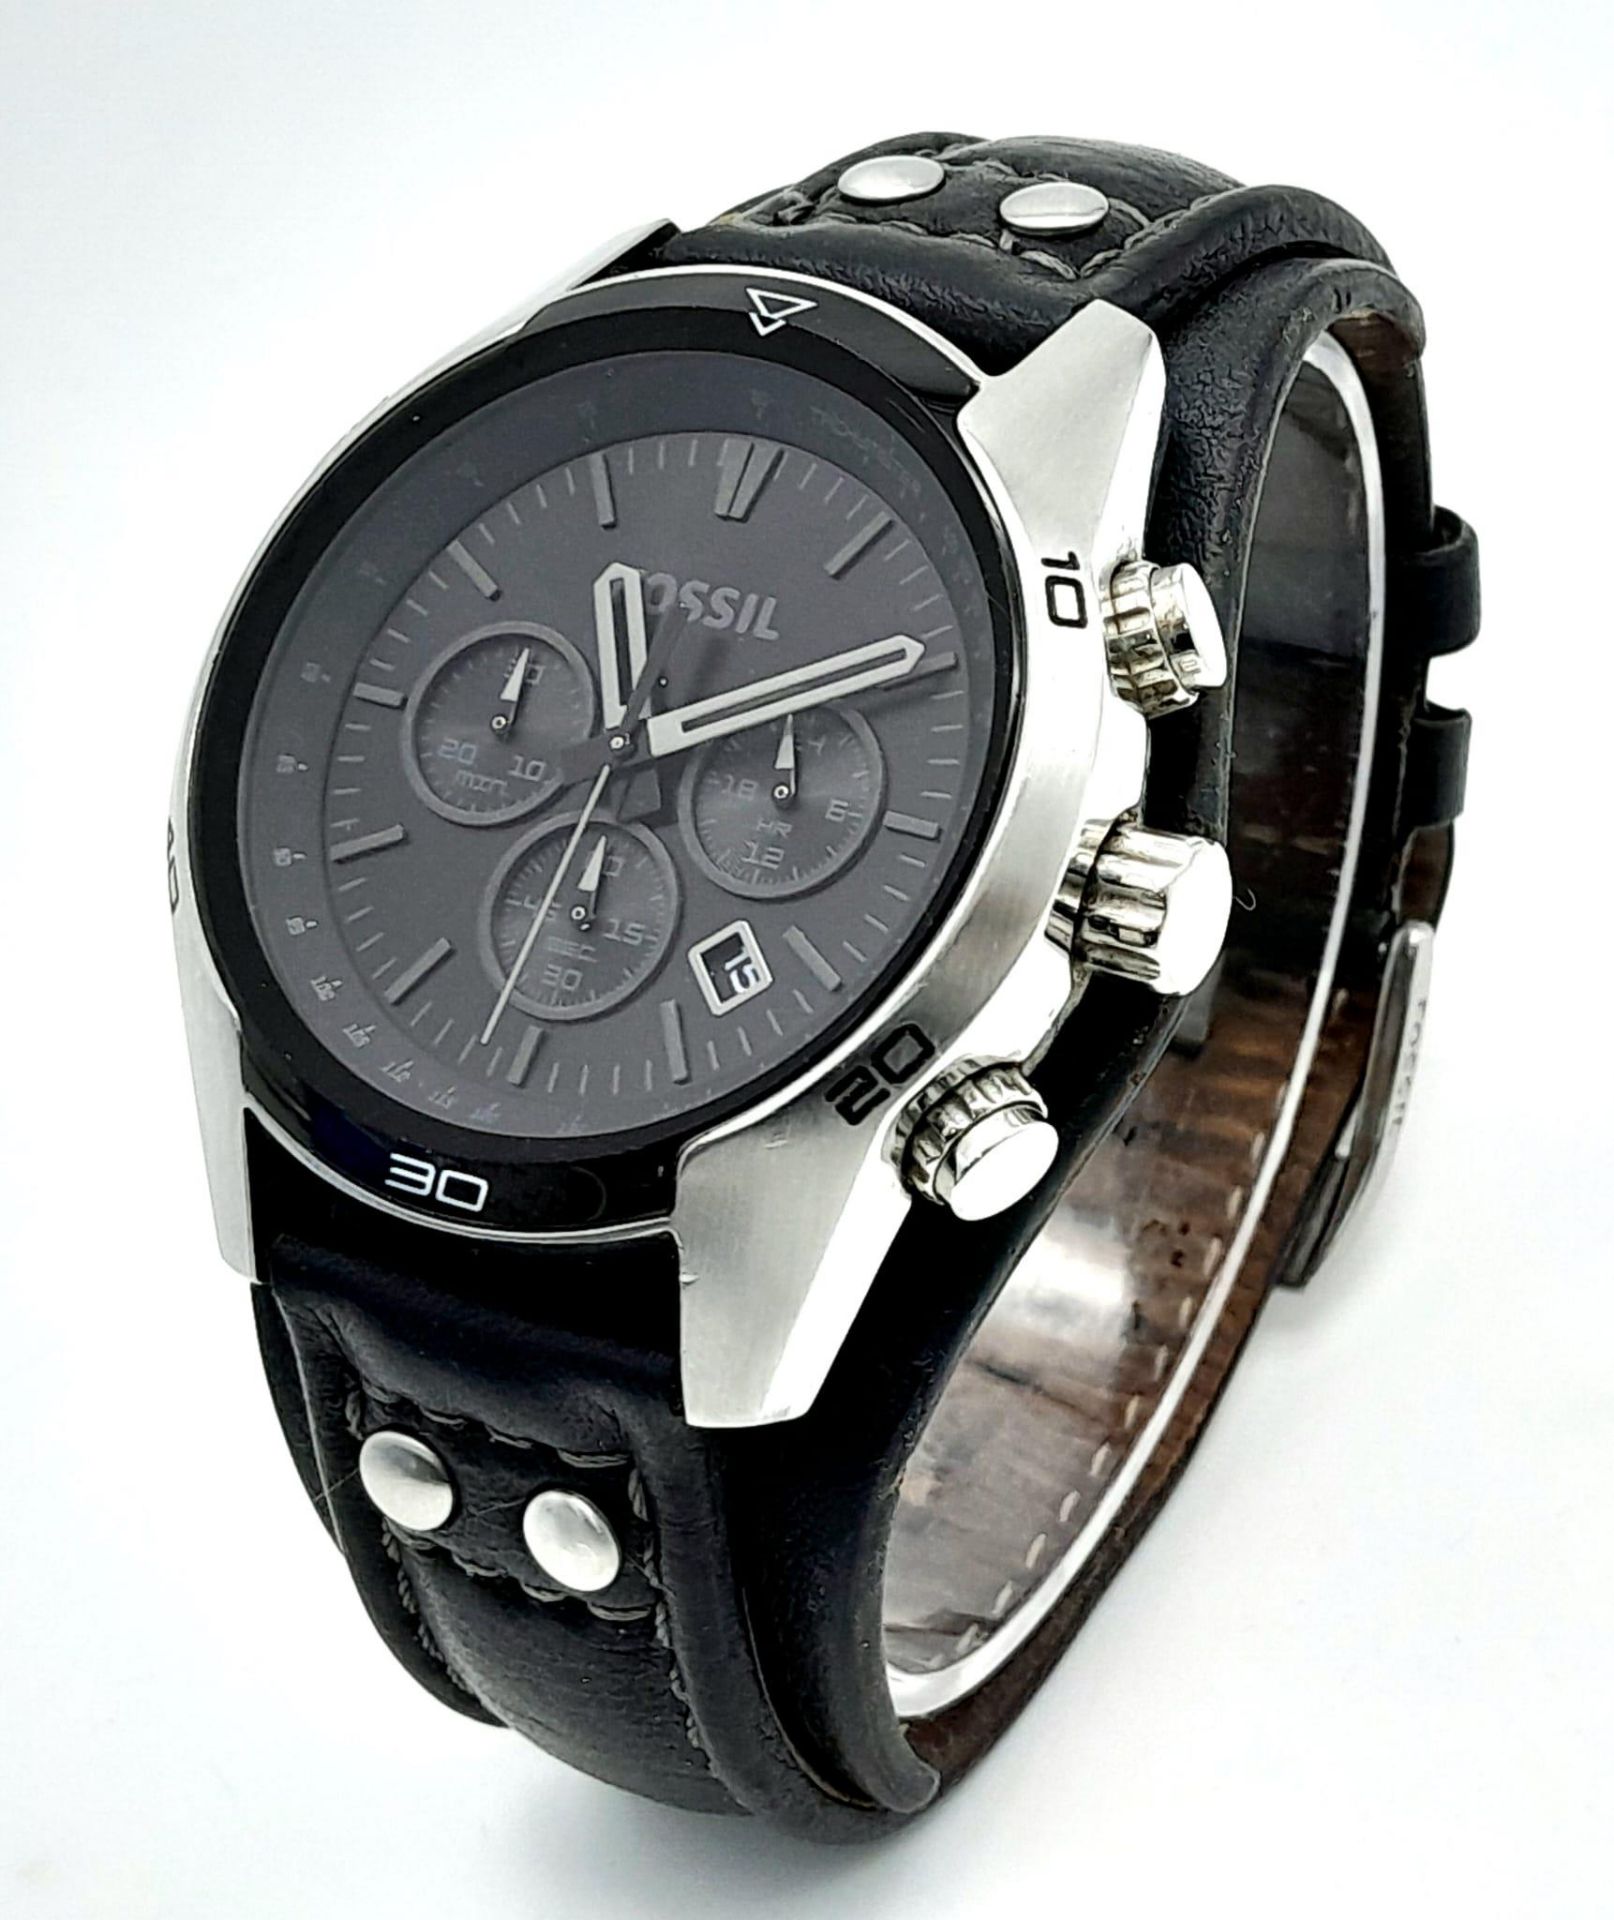 A Men’s Fossil Coachman Chronograph Black Leather Watch Model CH2546. 48mm Including Crown. New